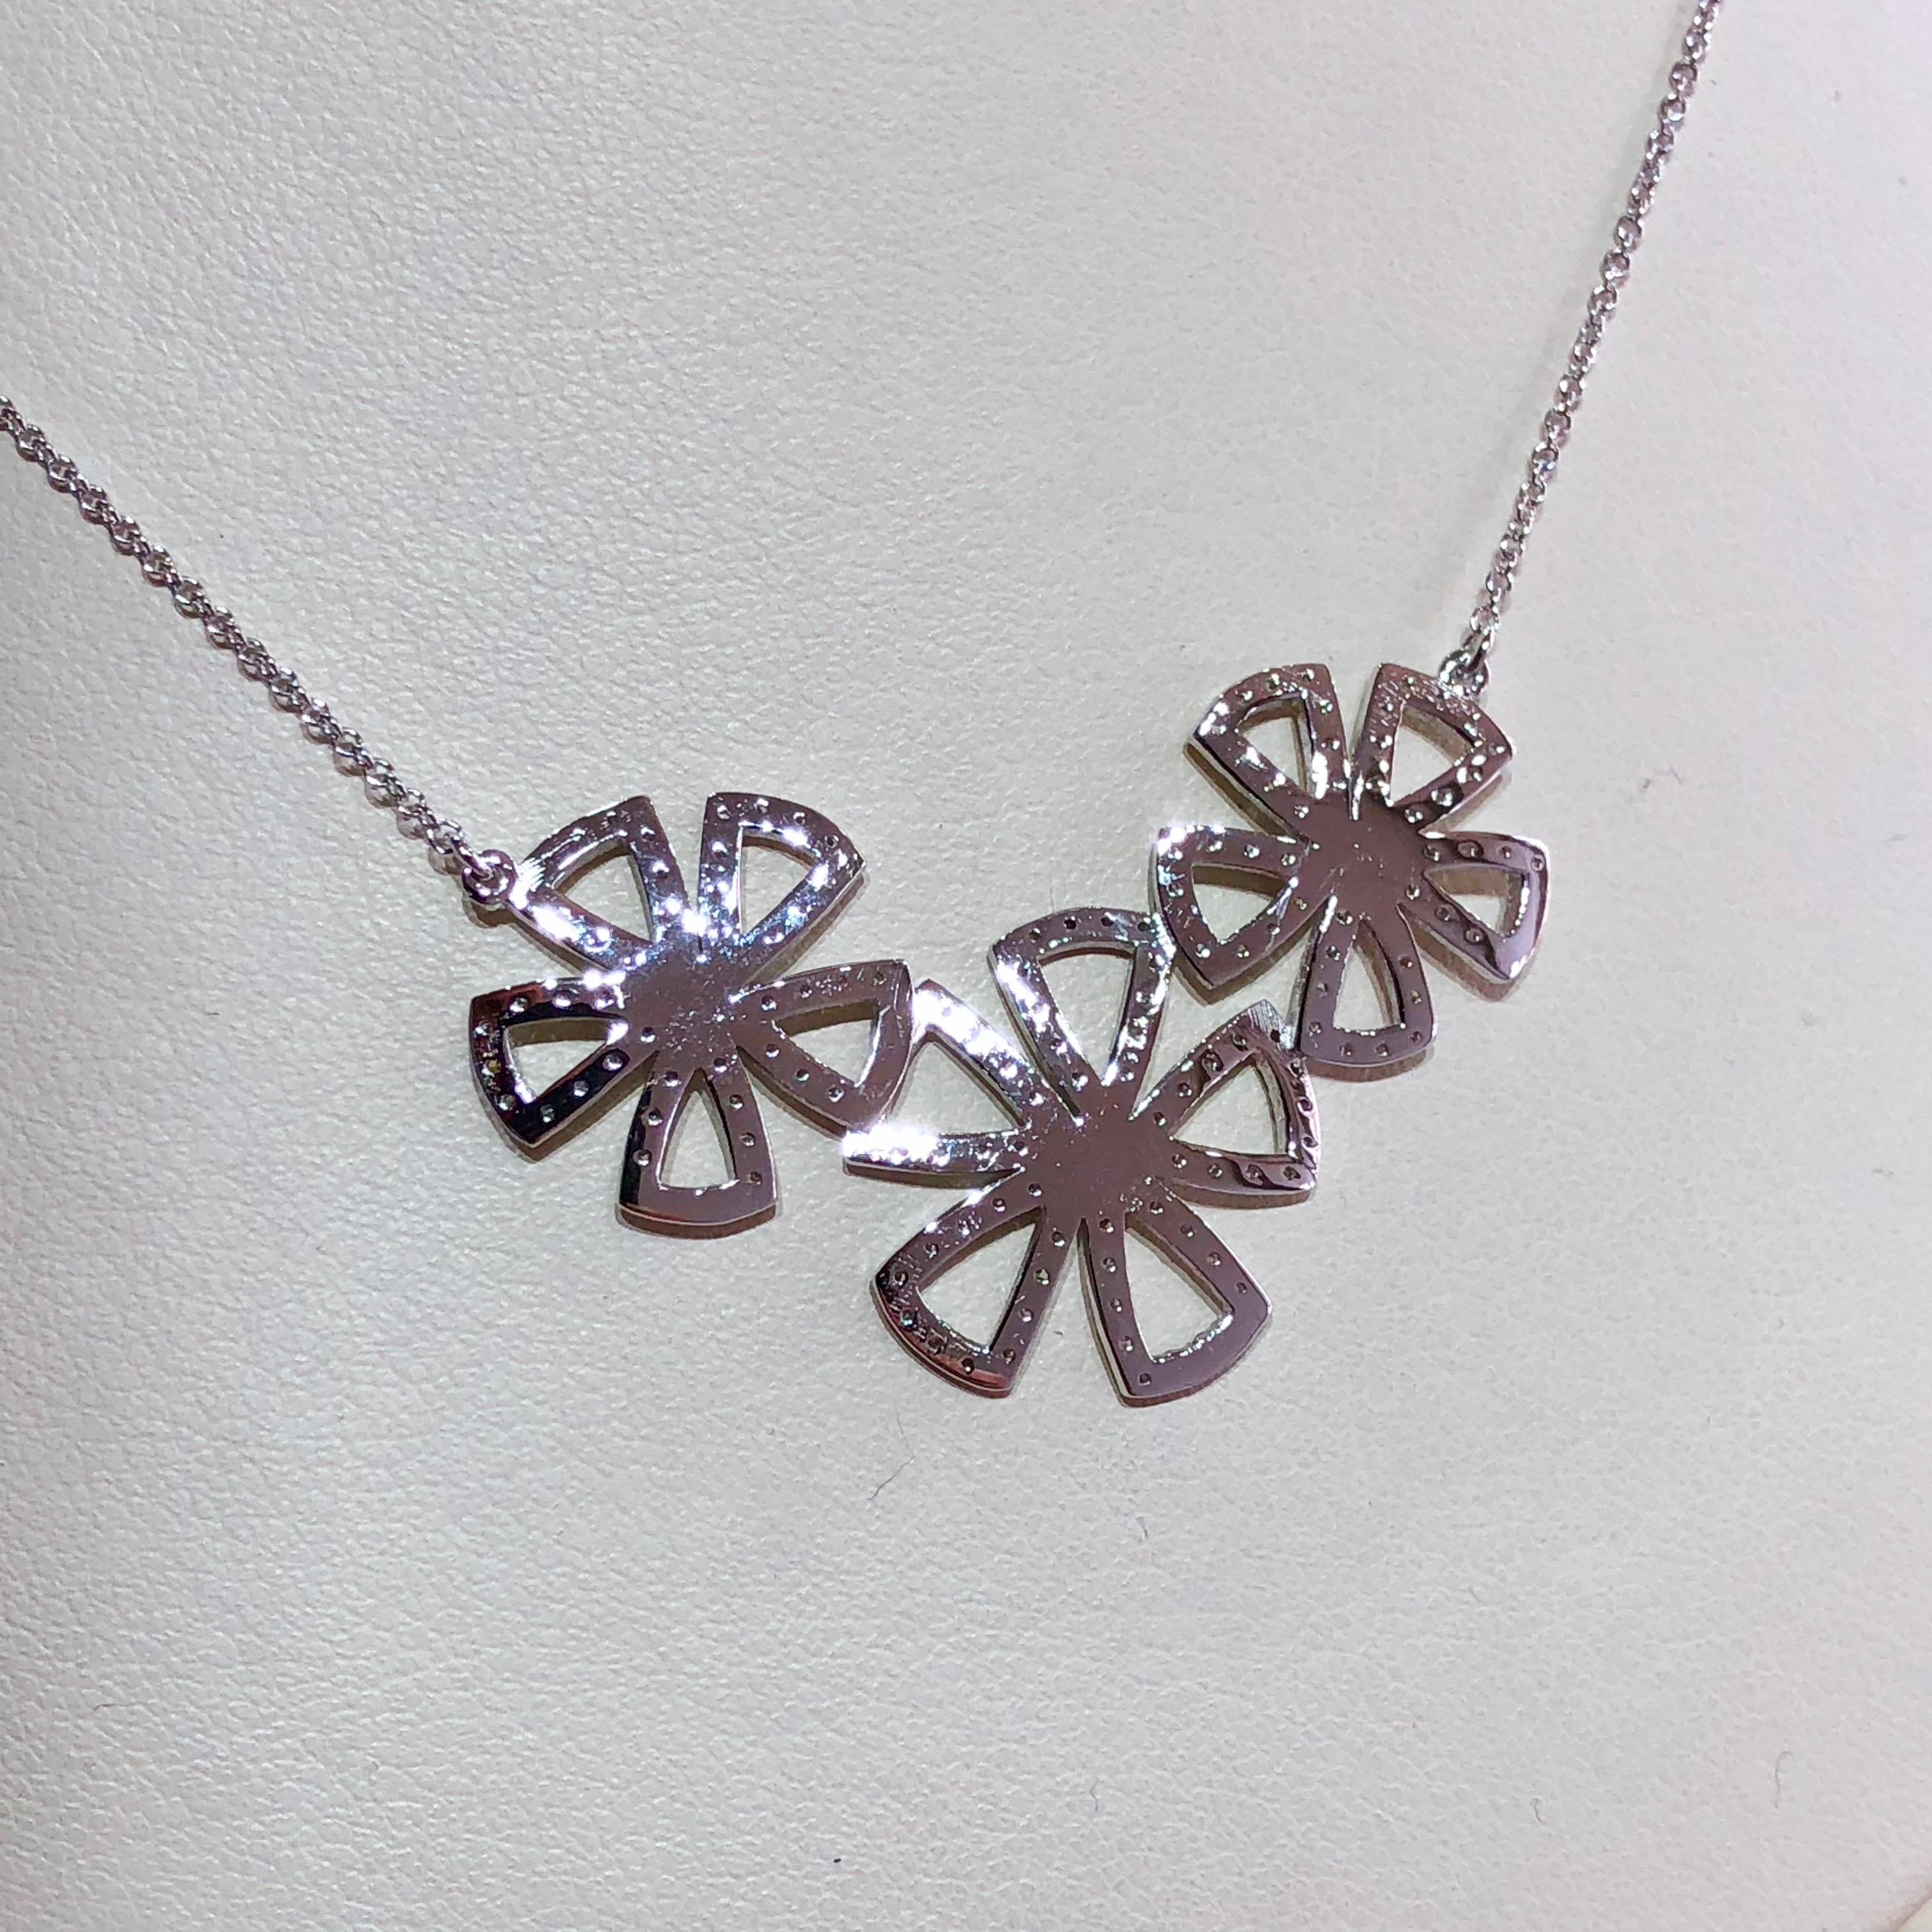 Women's Flower Necklace with 1.12 Carat of Diamond in 18 Karat Gold Botanical Collection